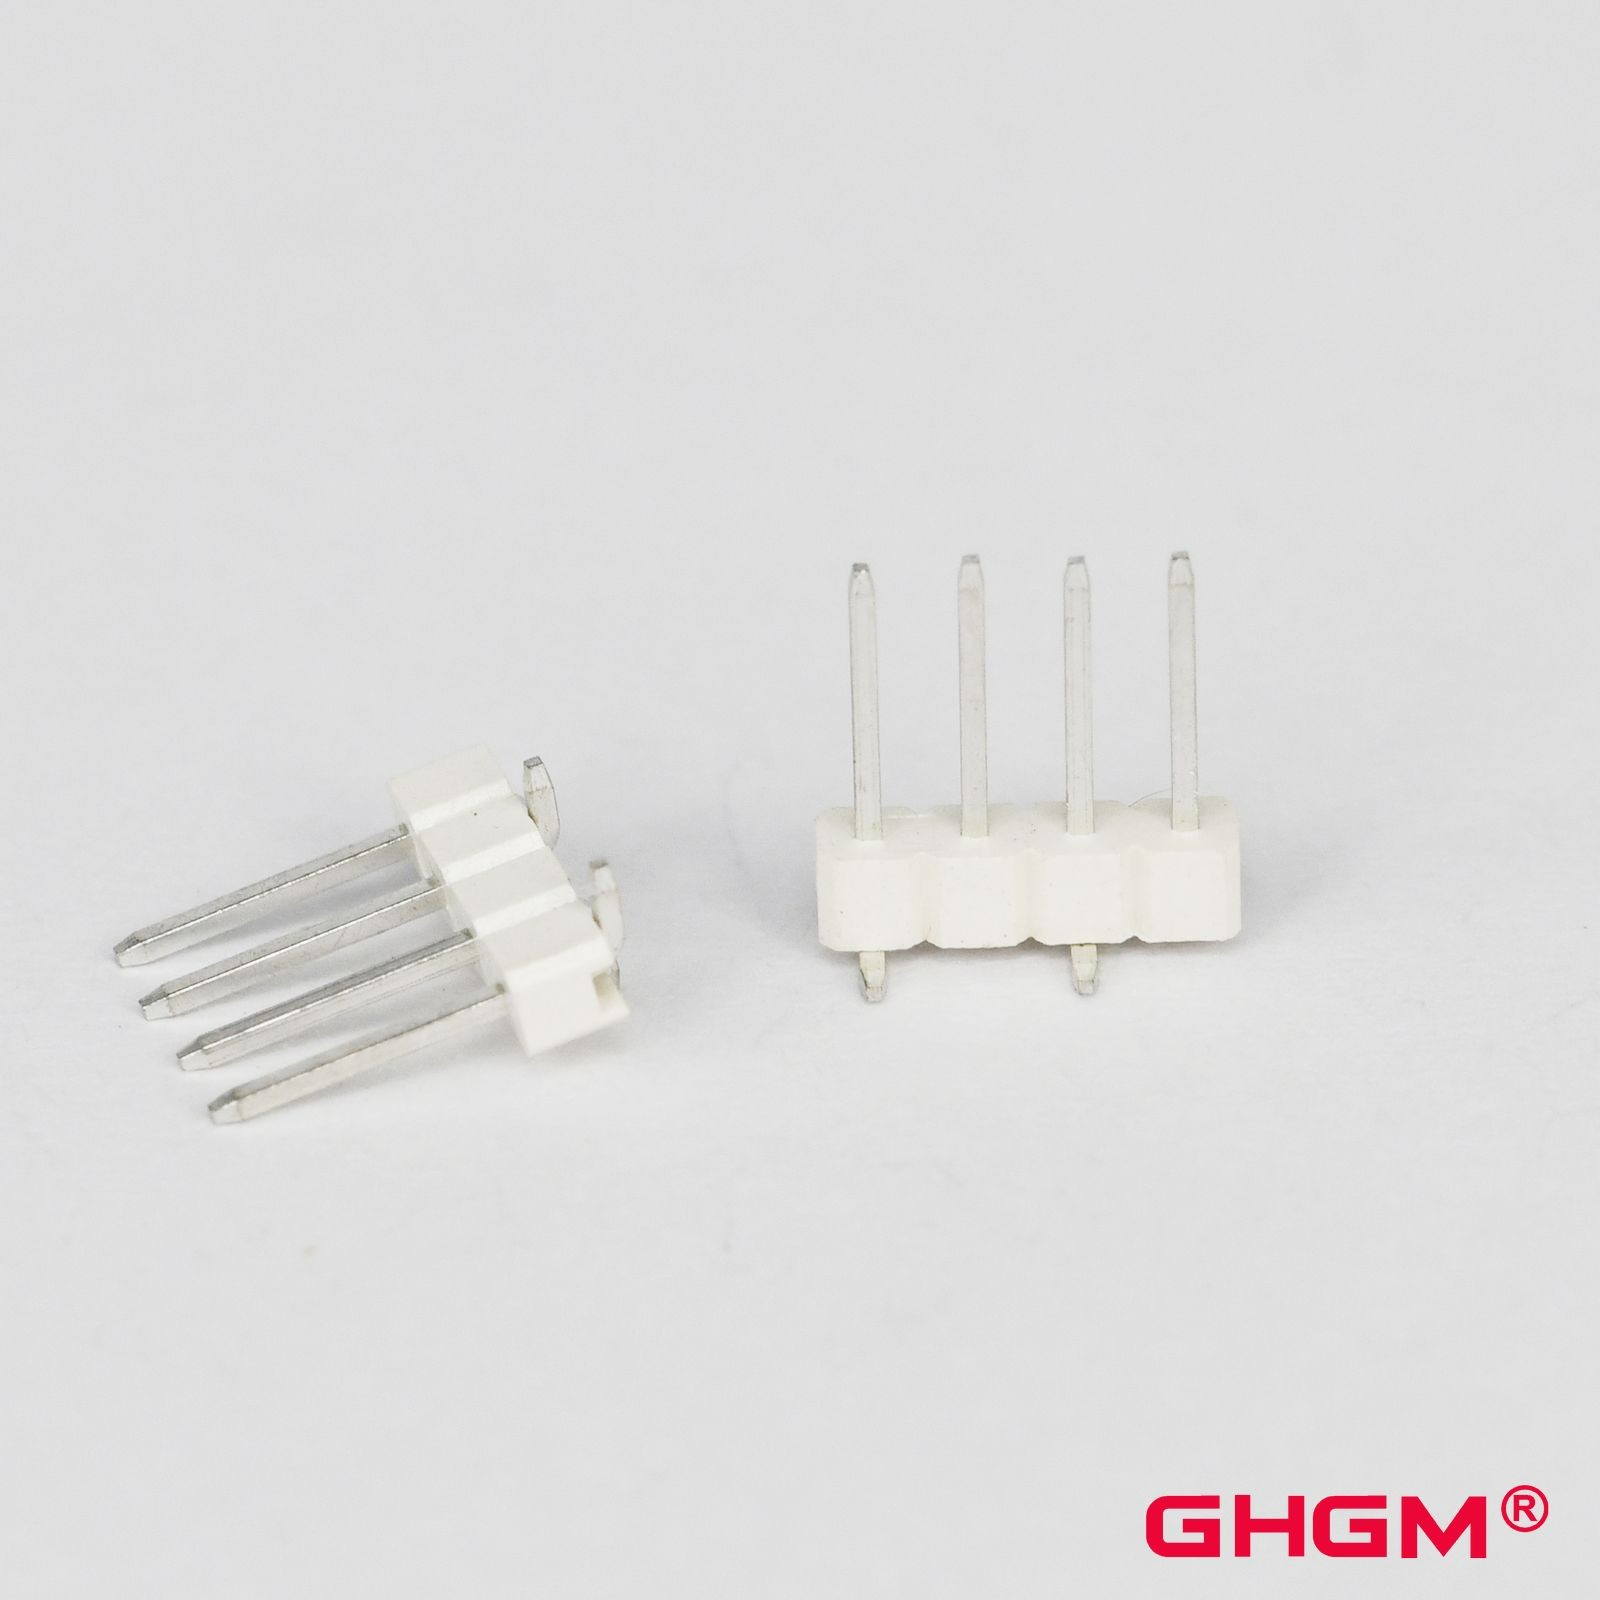 G20 M4024 Pitch 2.0mm SMT type Male connector, Intelligent Light Connector, smart light connector, male connector